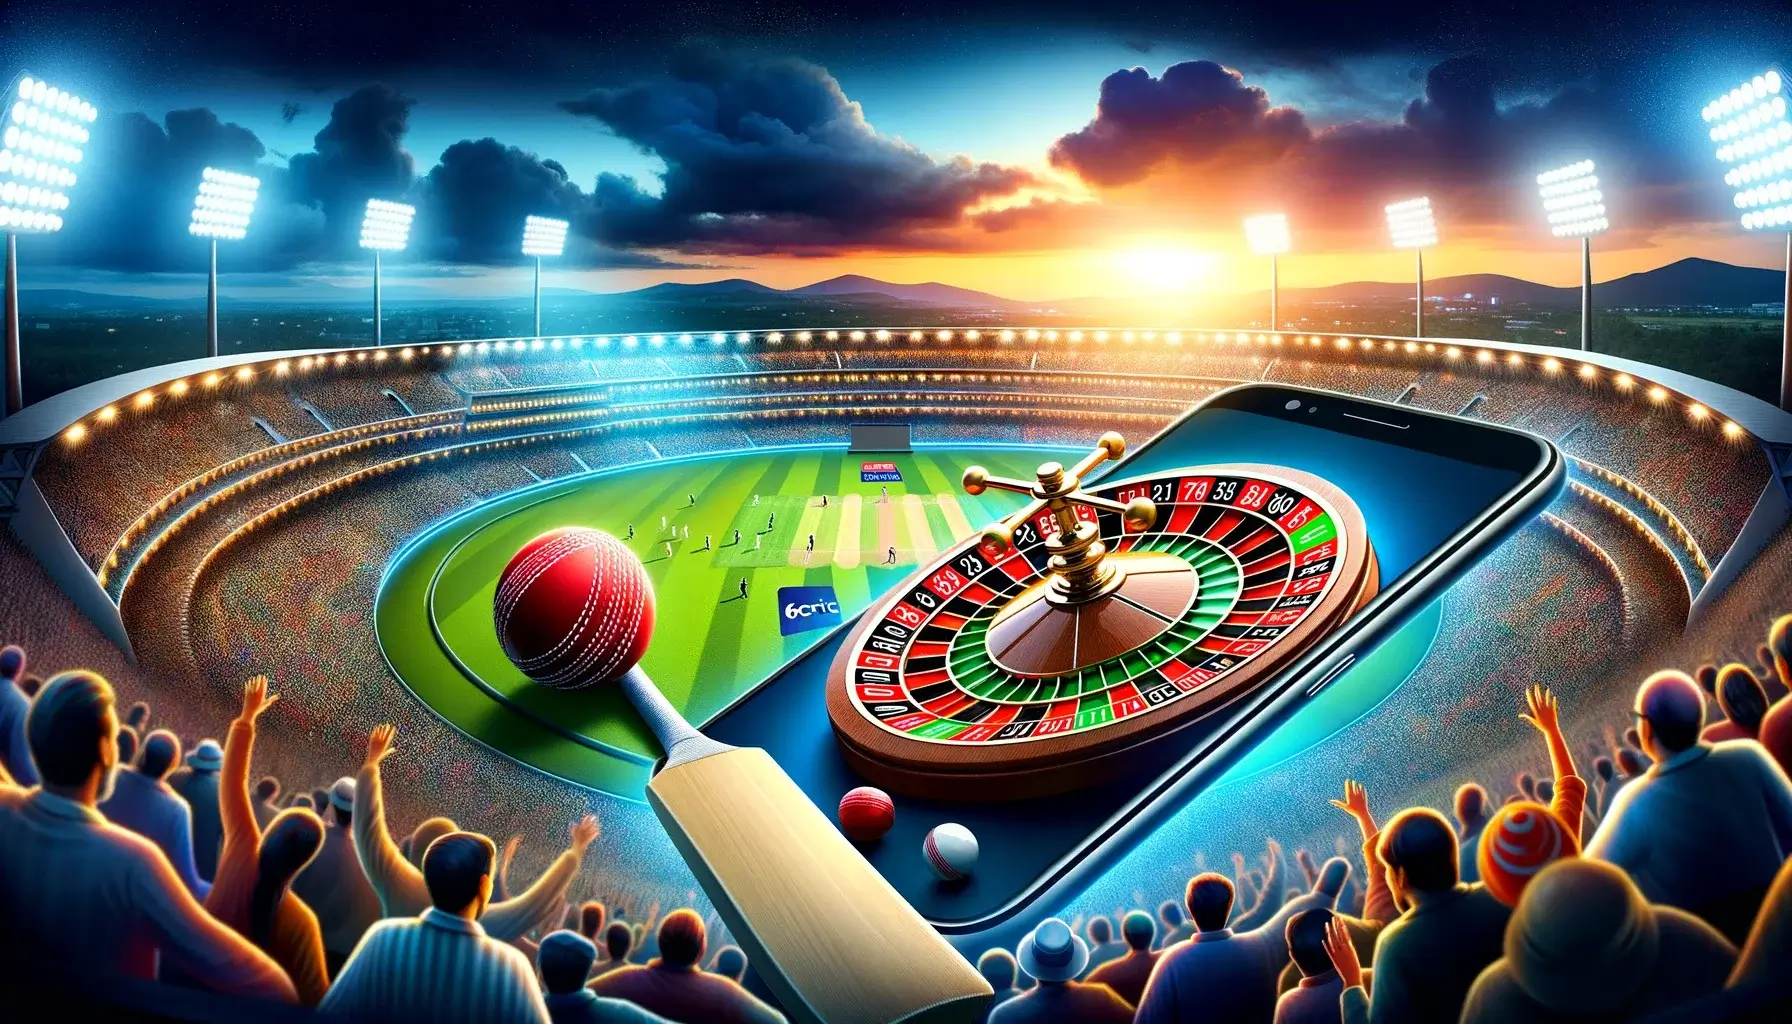 online betting site